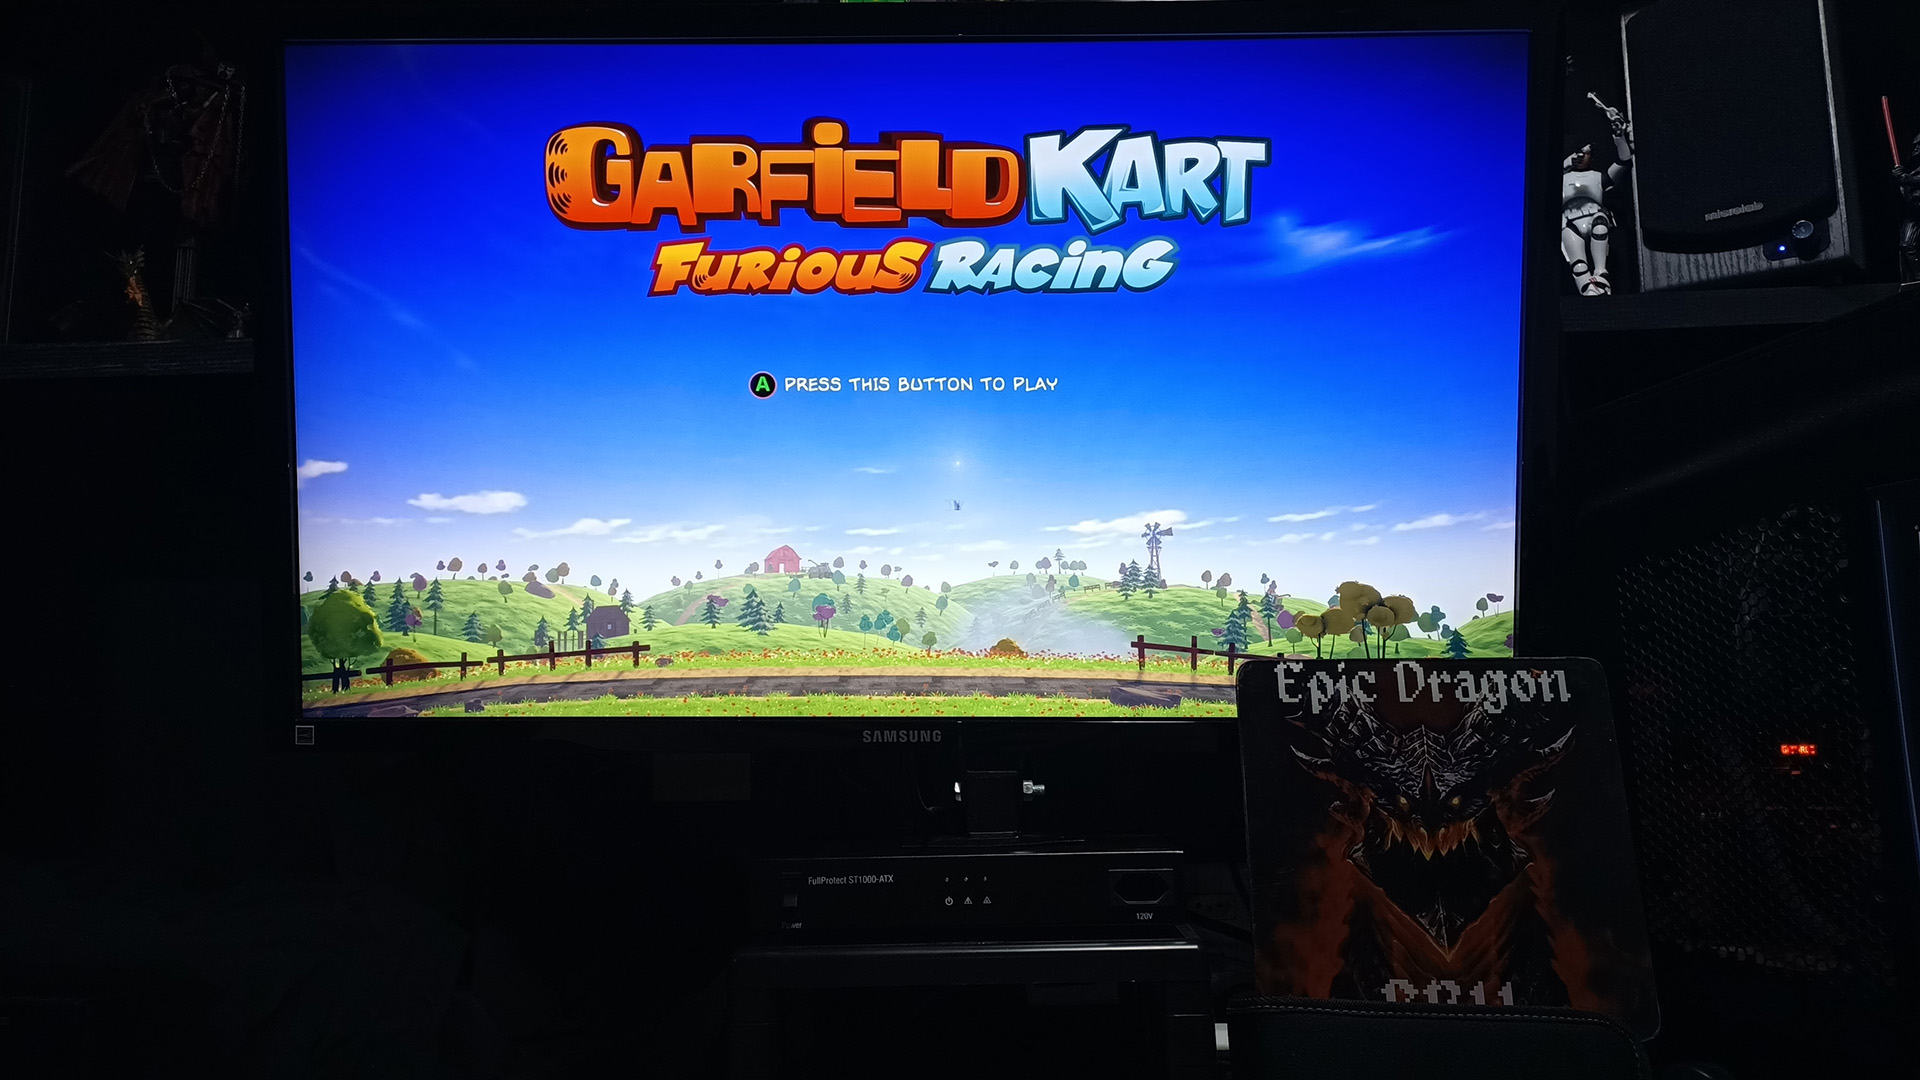 Garfield Kart Furious Racing: Catz In The Hood [Time Trial: 3 Laps] time of 0:01:22.602